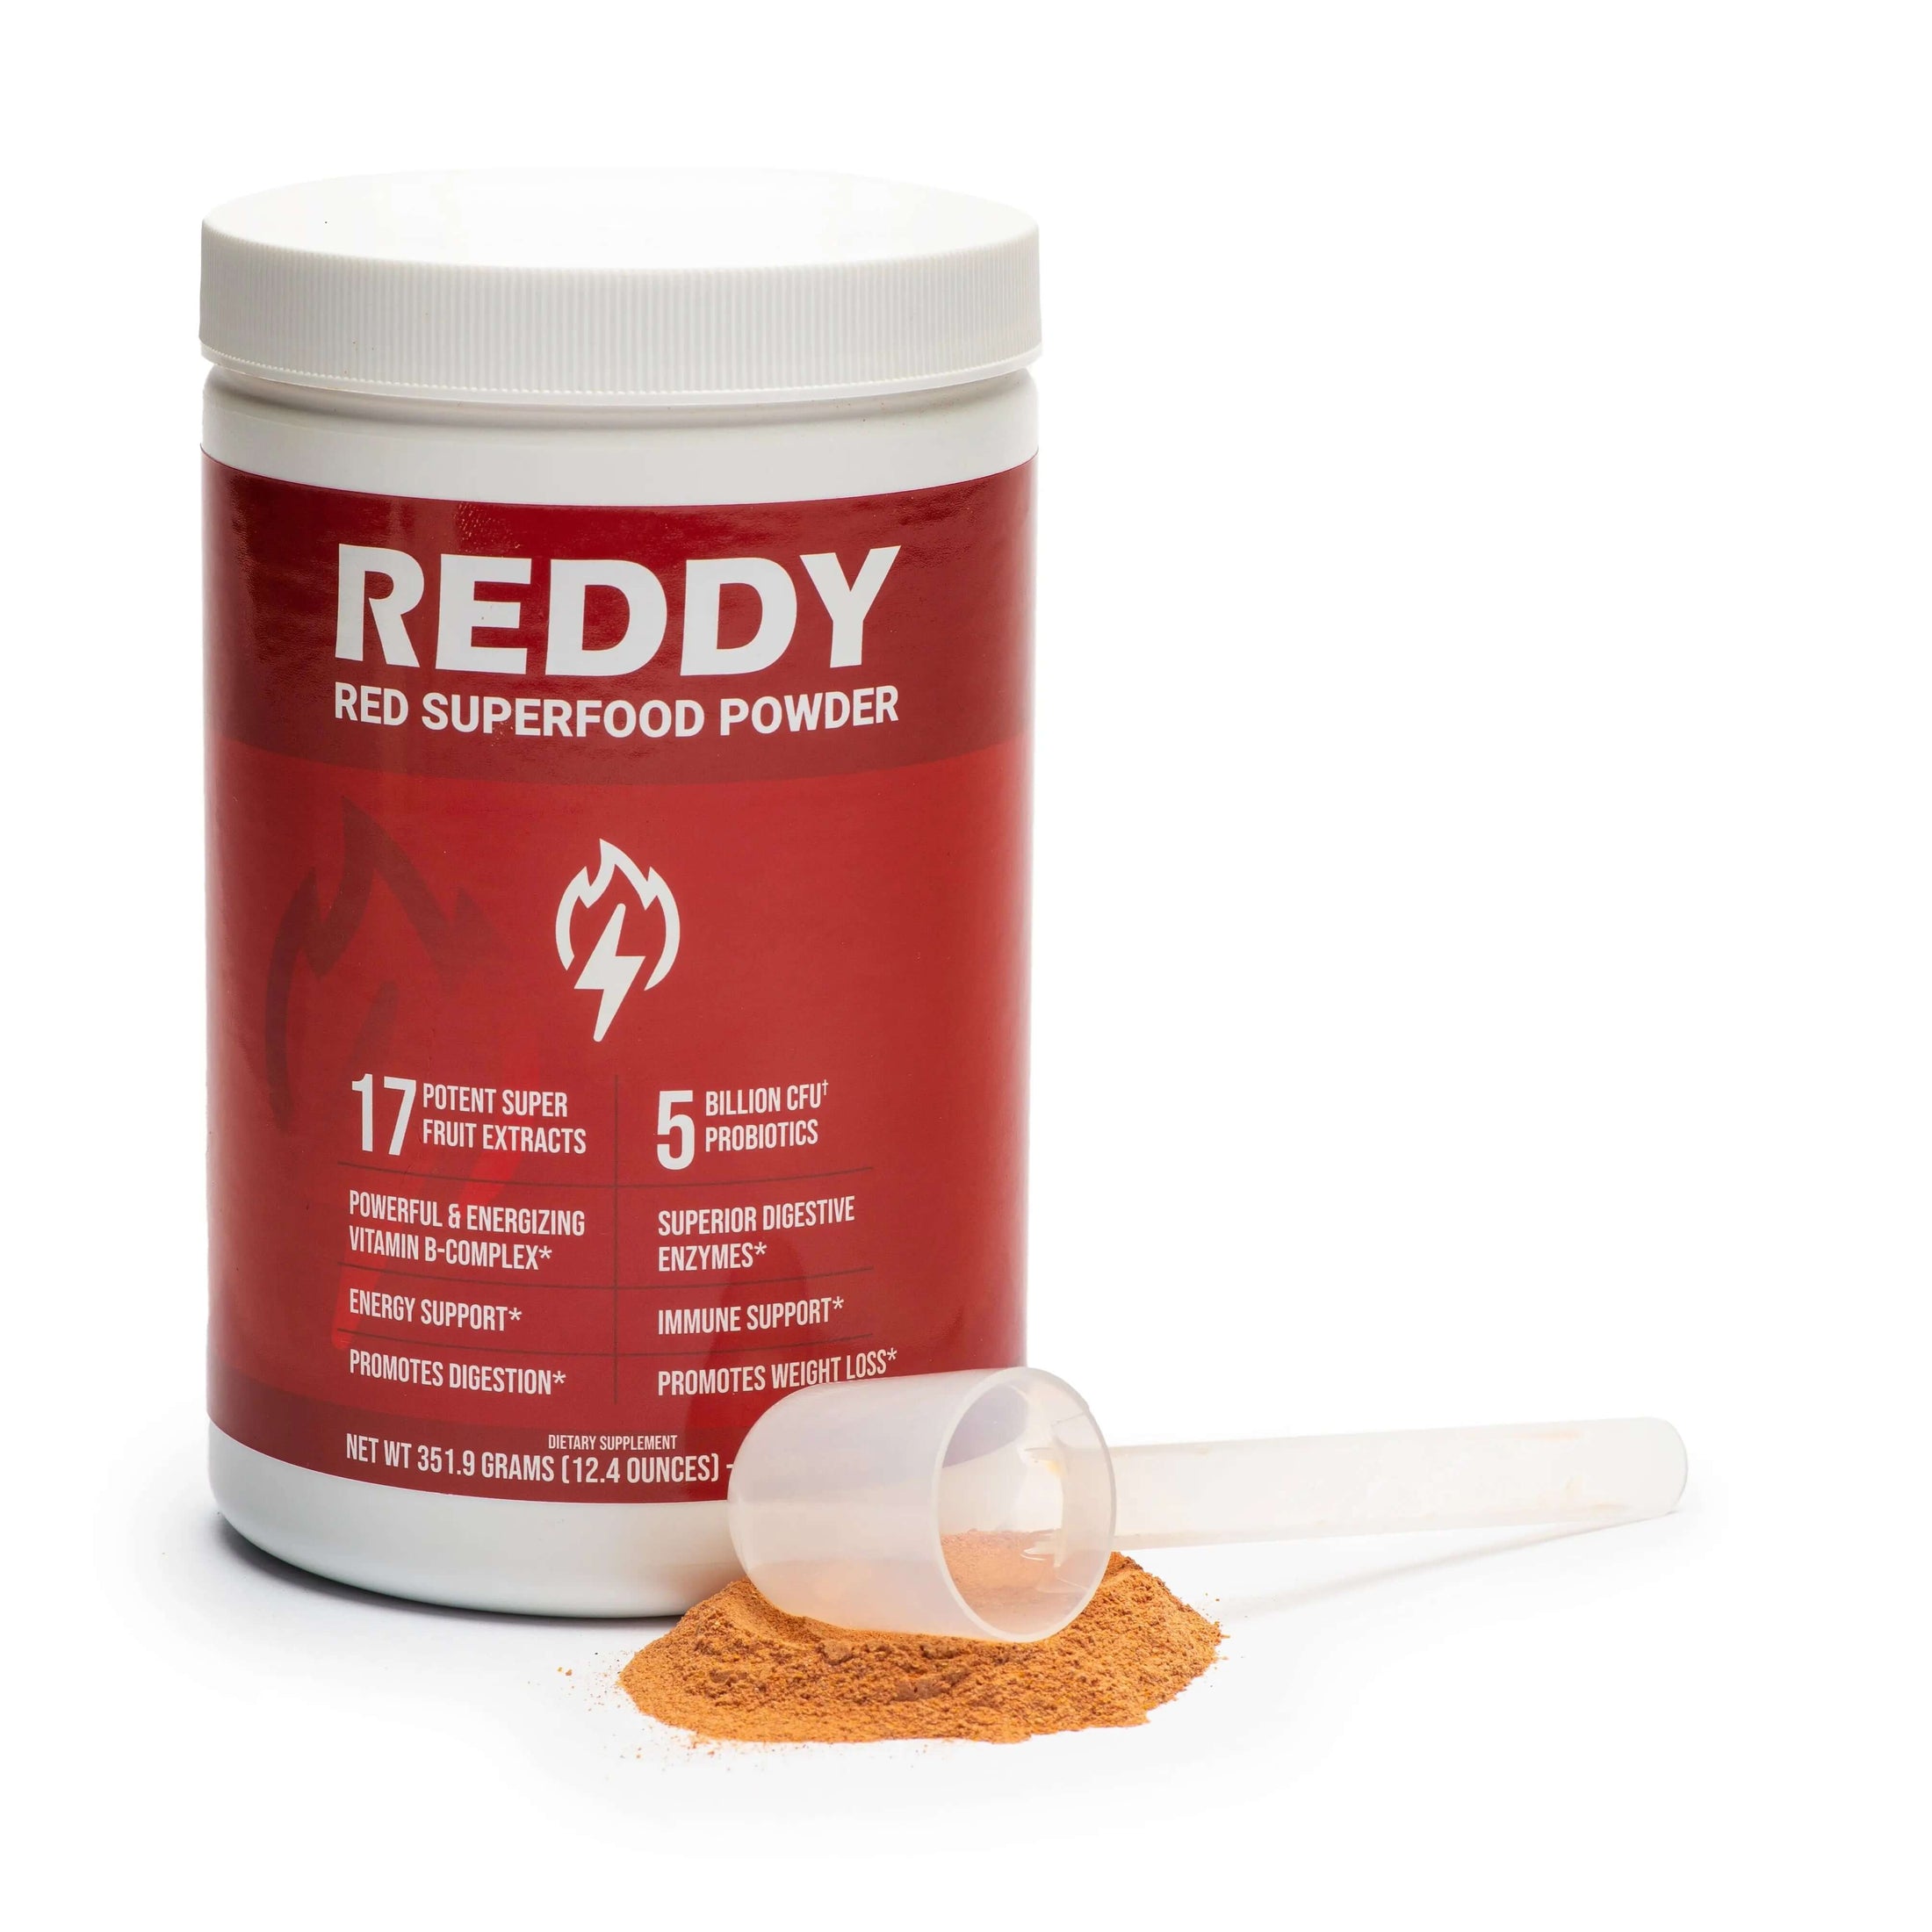 Reddy Red Organic Superfood Powder alongside fresh fruits like pomegranates and berries, showcasing potential complementary ingredients for recipes.